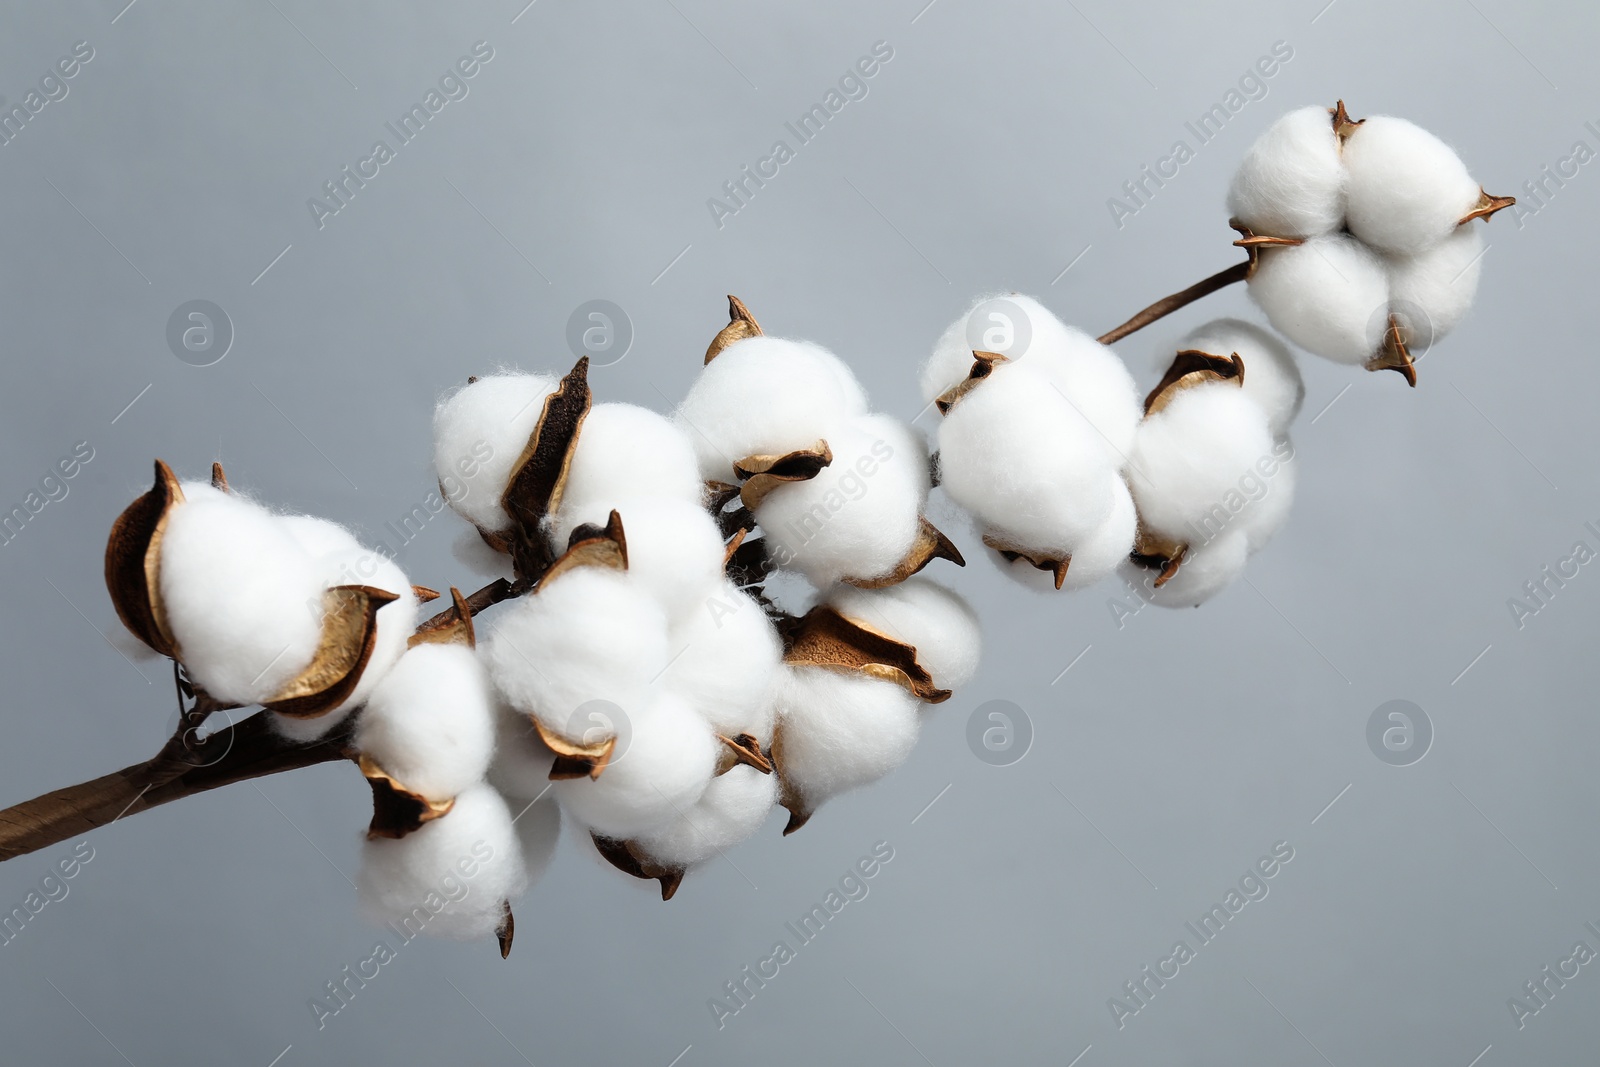 Photo of Beautiful cotton branch with fluffy flowers on light grey background